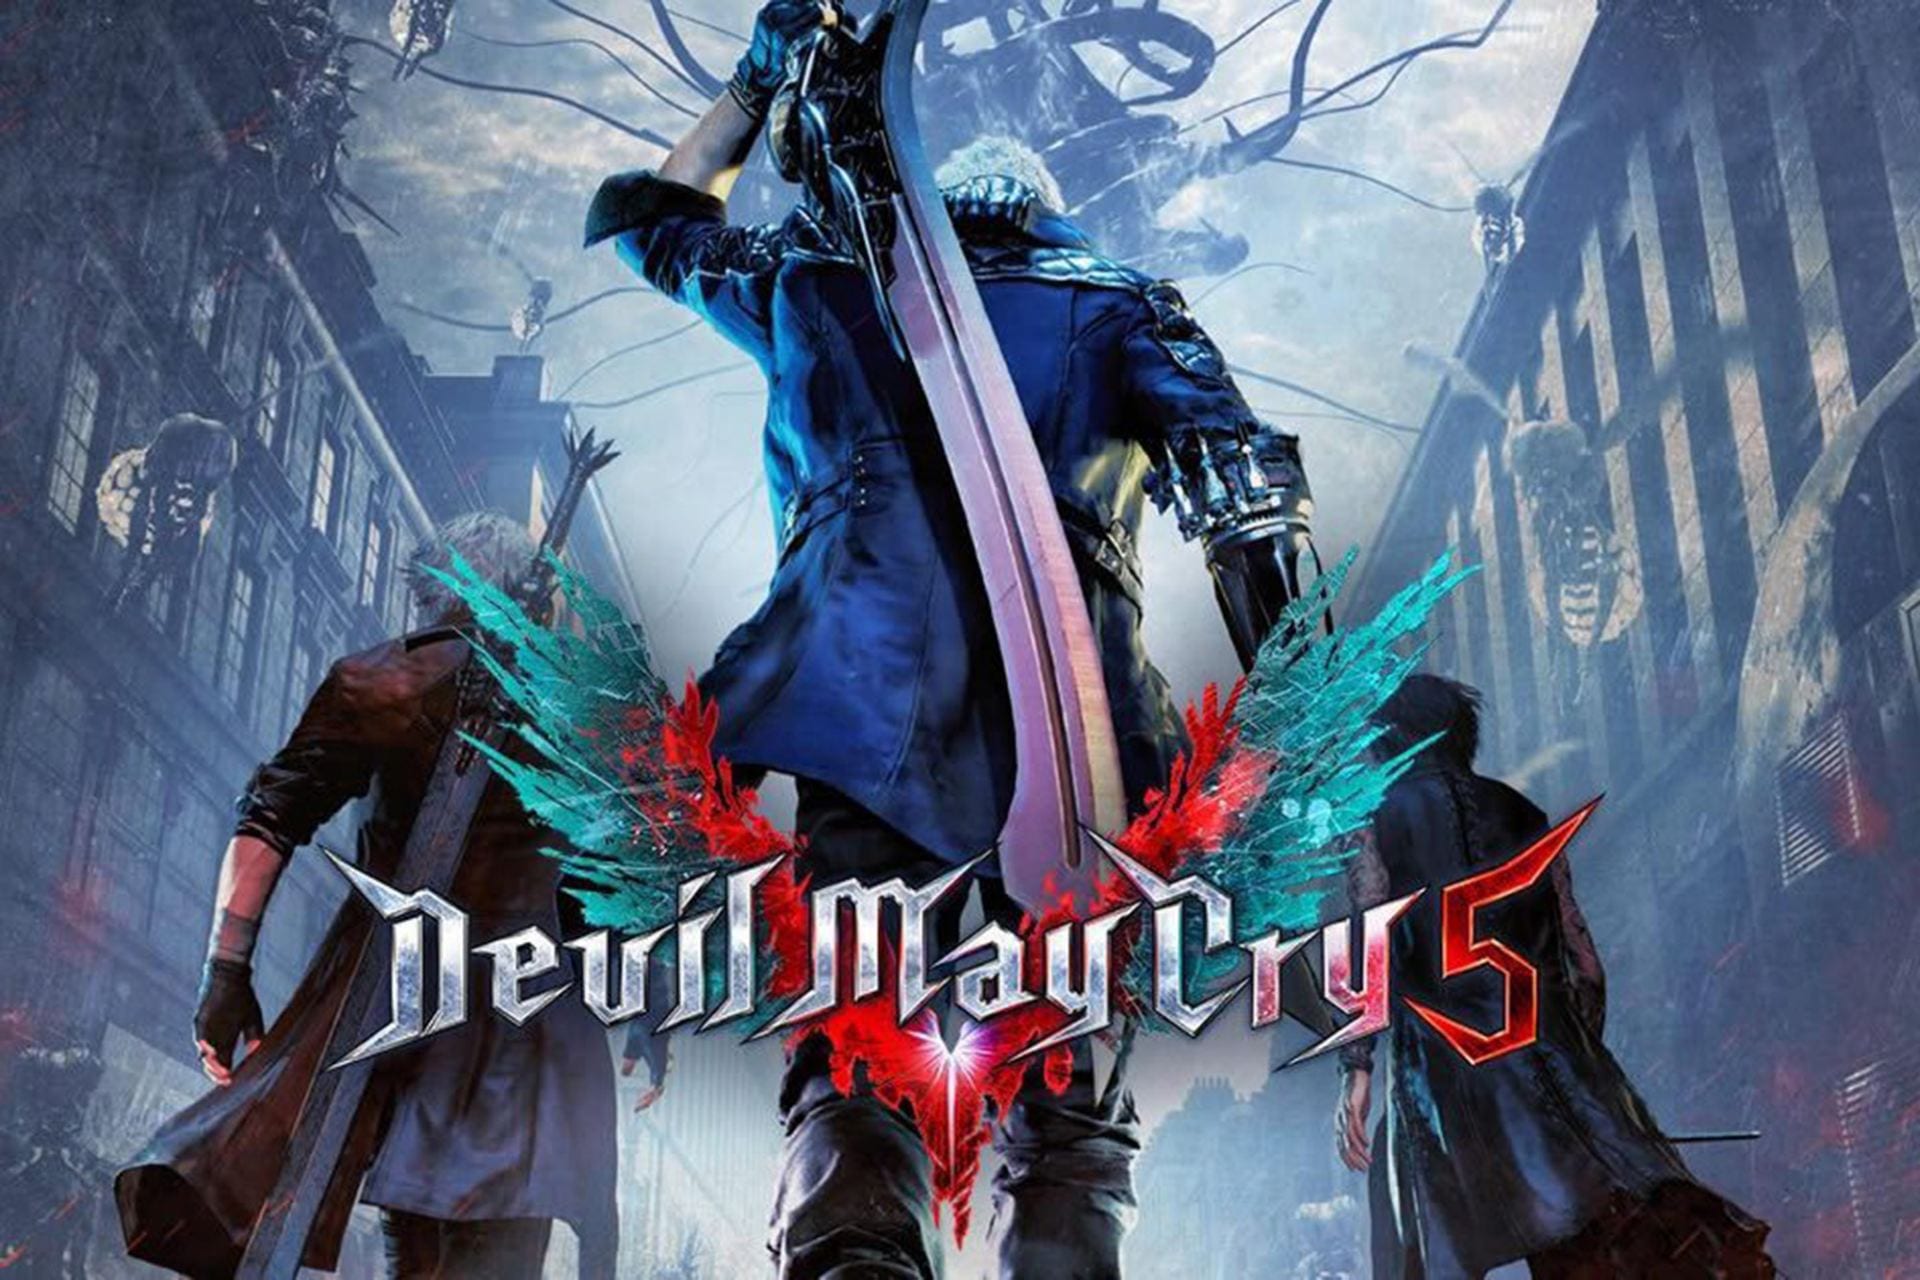 Devil may cry 3 can find steam фото 9